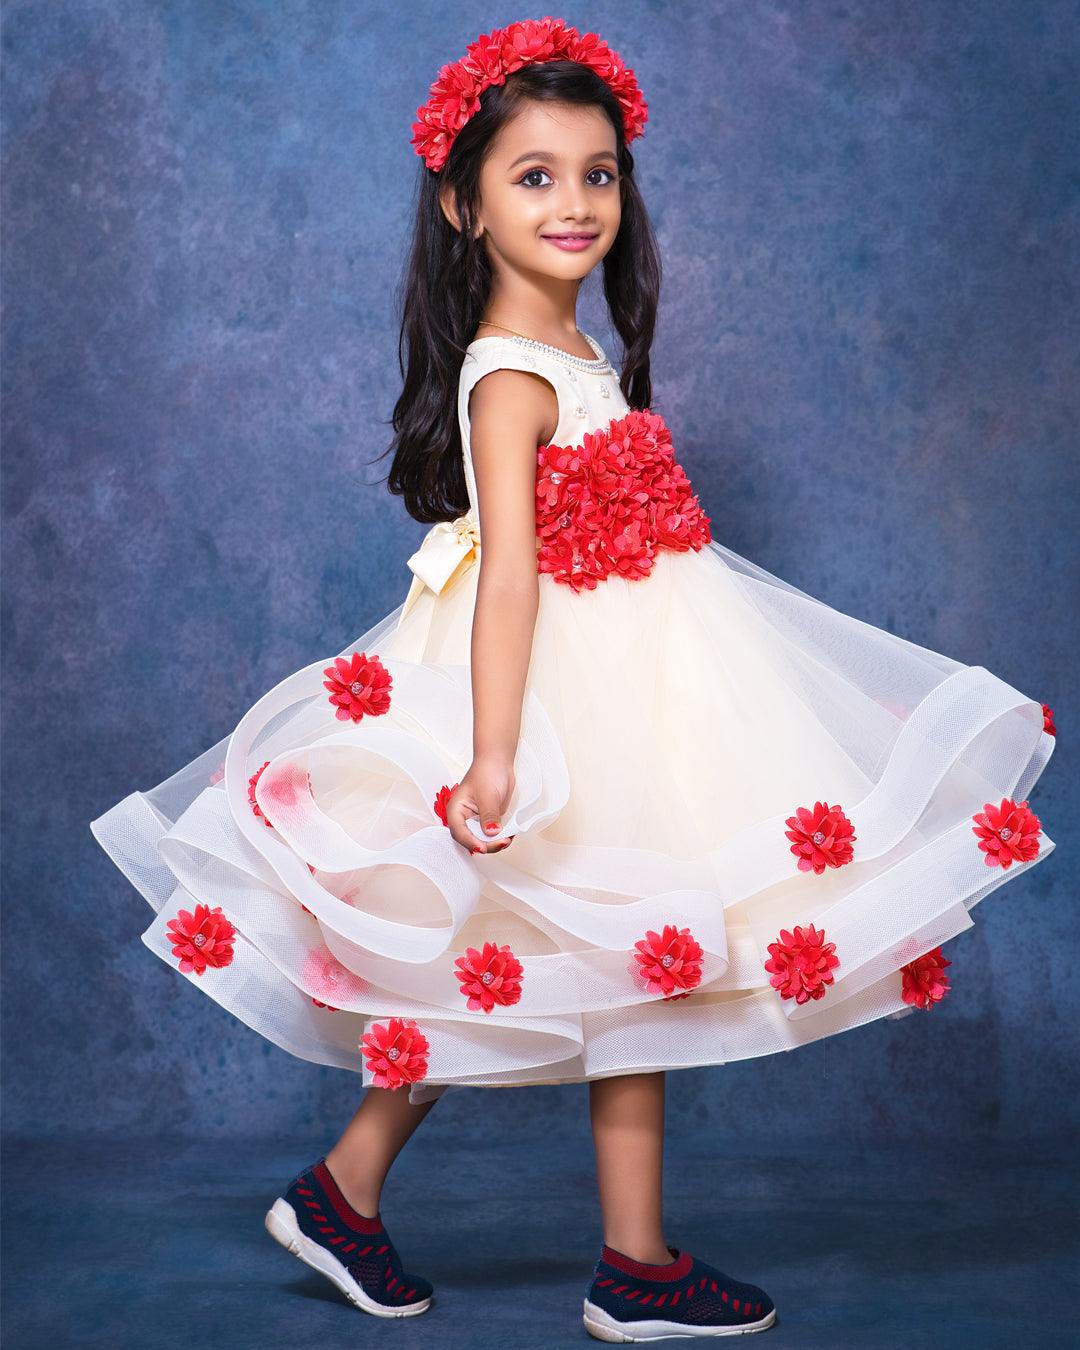 Sandal & Red Combo Heavy Partywear Flower Frock - Matching Hairband
Material: Sandal colour heavy layer frock. For the more elegant look red colour flowers are spread on the front and back side of the fork. In the neck portion cream